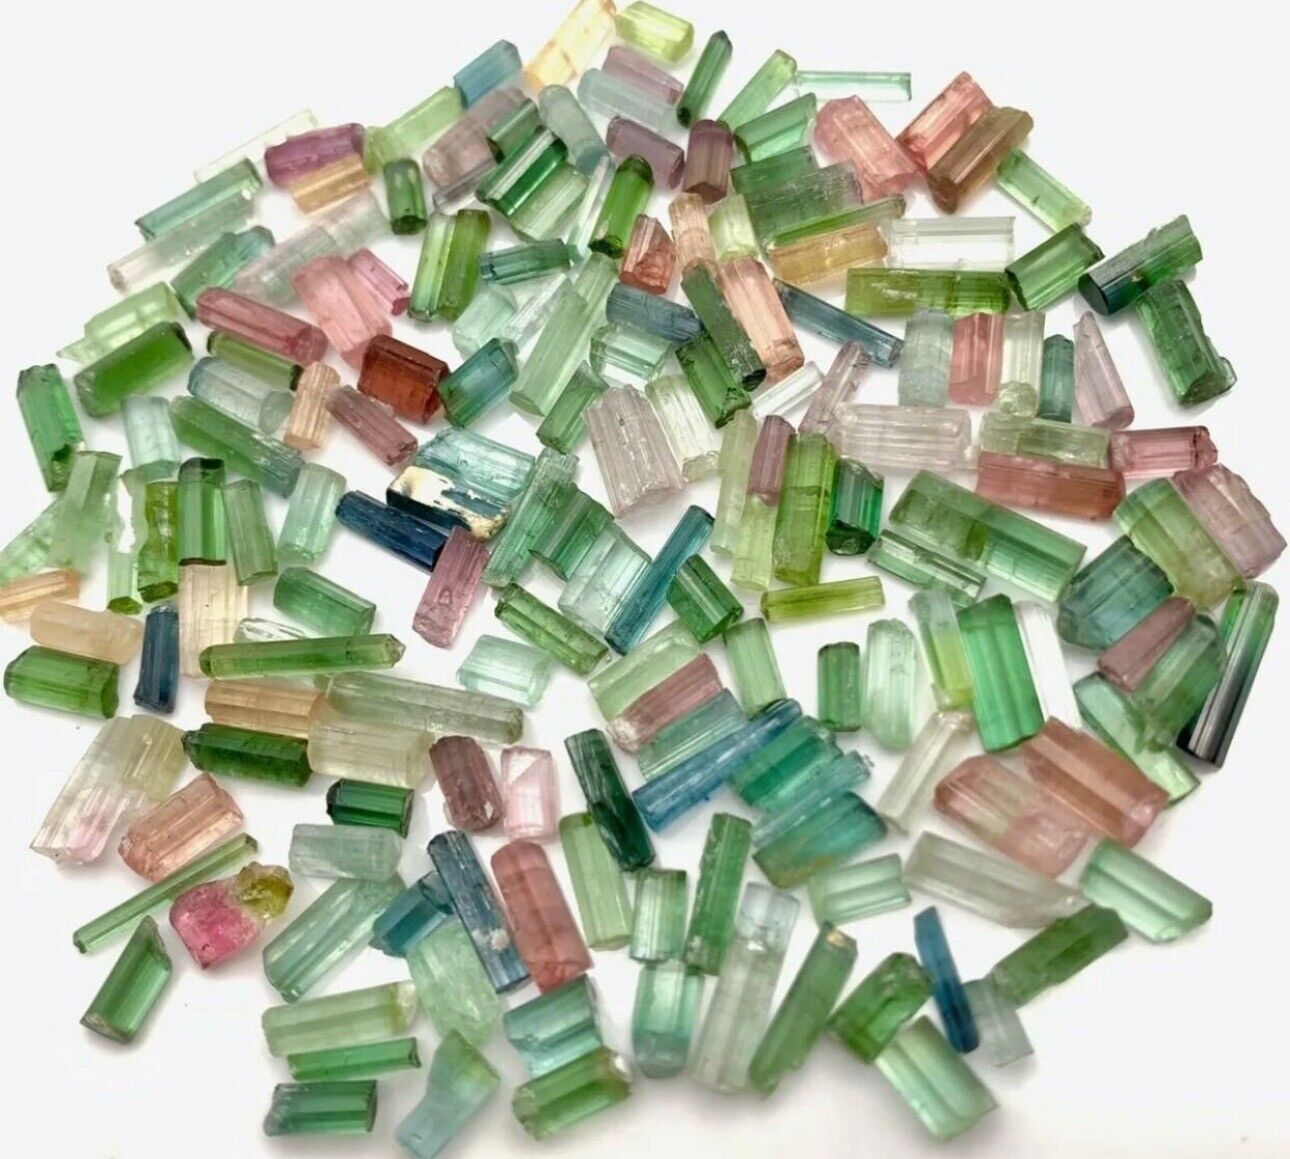 150 Ct Gorgeous mixed colour gemmy tourmaline Jewelry Size Crystals From @afg